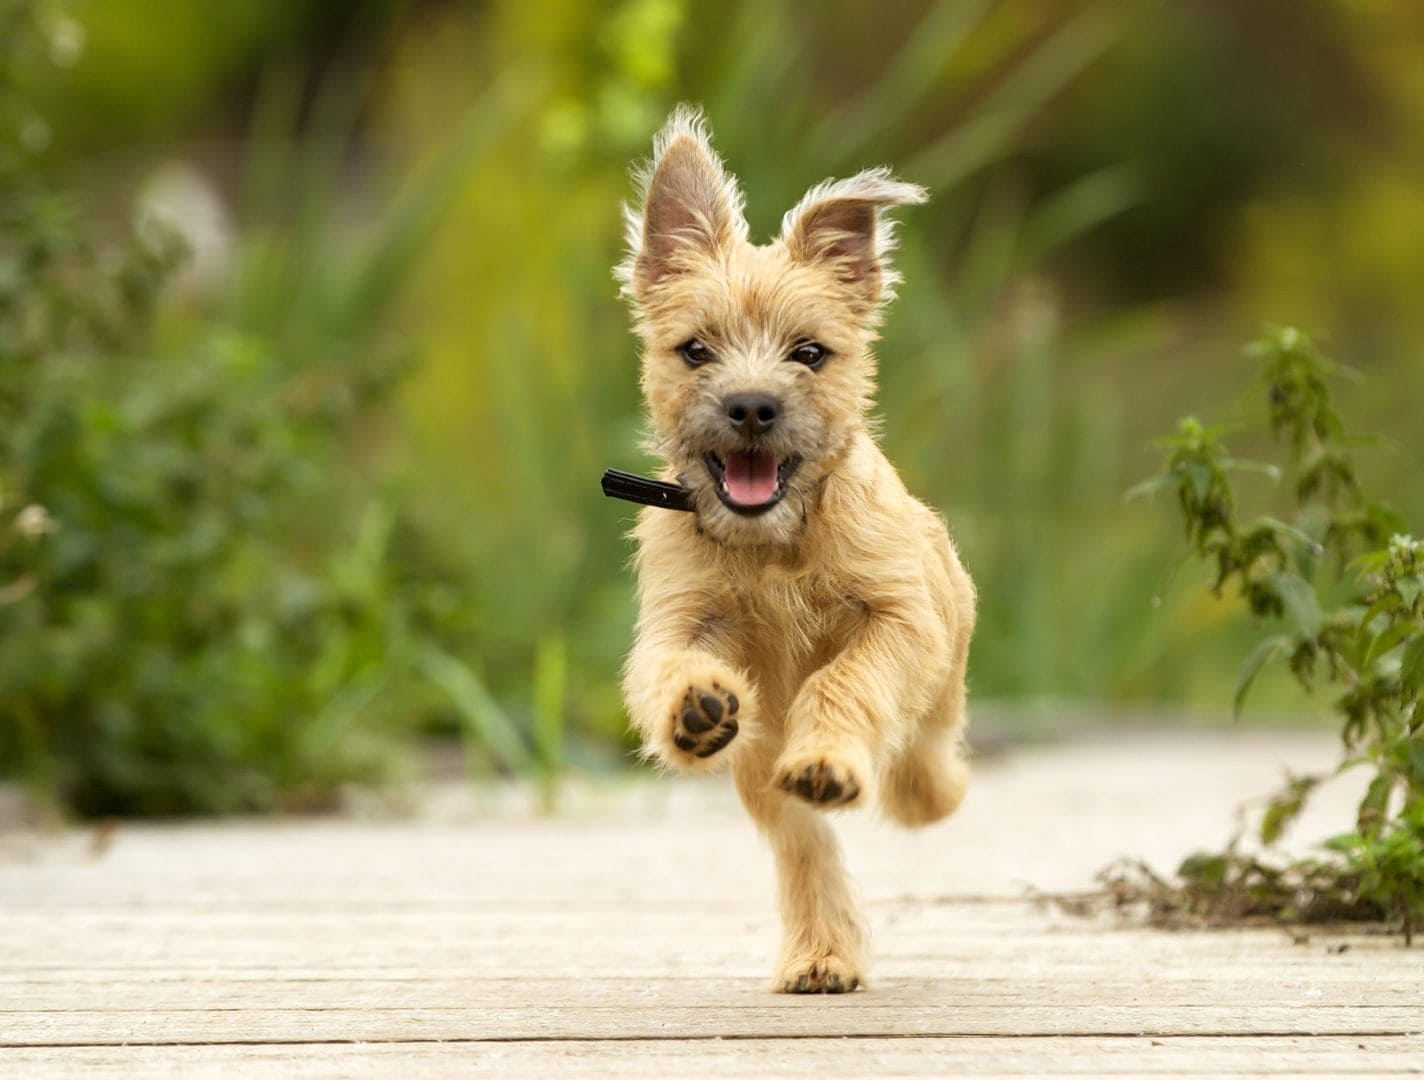 25 reasons dogs are the best pets on Earth